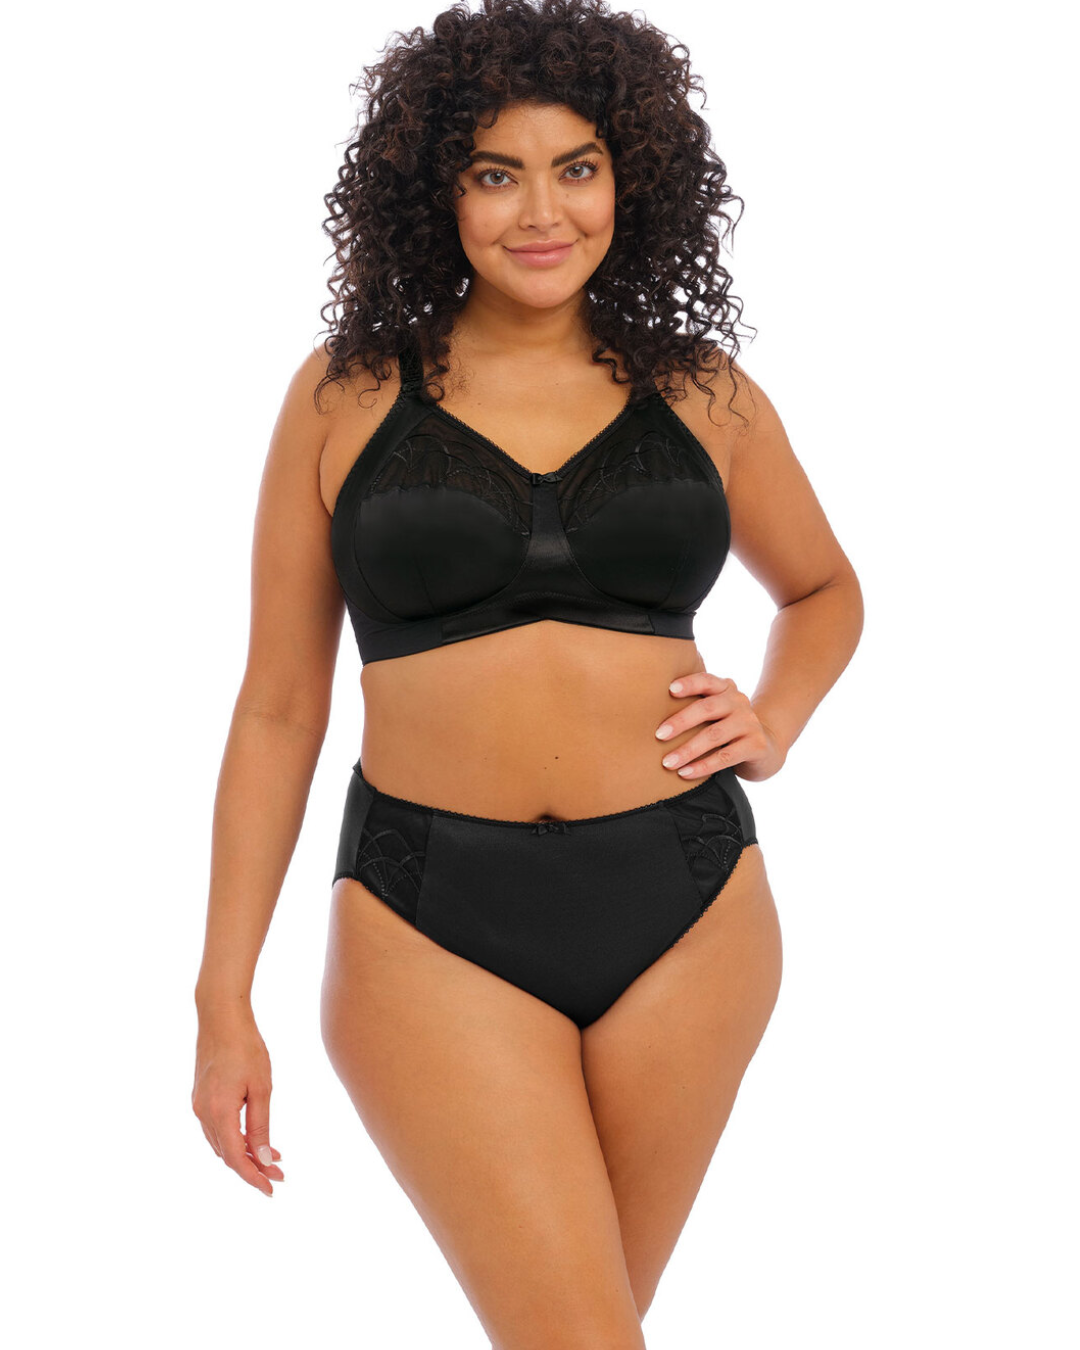 Elomi Cate Soft Cup Bra in black with sheer embroidery, soft satin cups, and an intersecting arc design. The bra offers three-piece cups with side support for shaping, uplift, and separation. It features a wide elastic underband, flexible side boning, and powernet wings for enhanced support. Complete with charming bow details, this bra combines elegance and comfort.